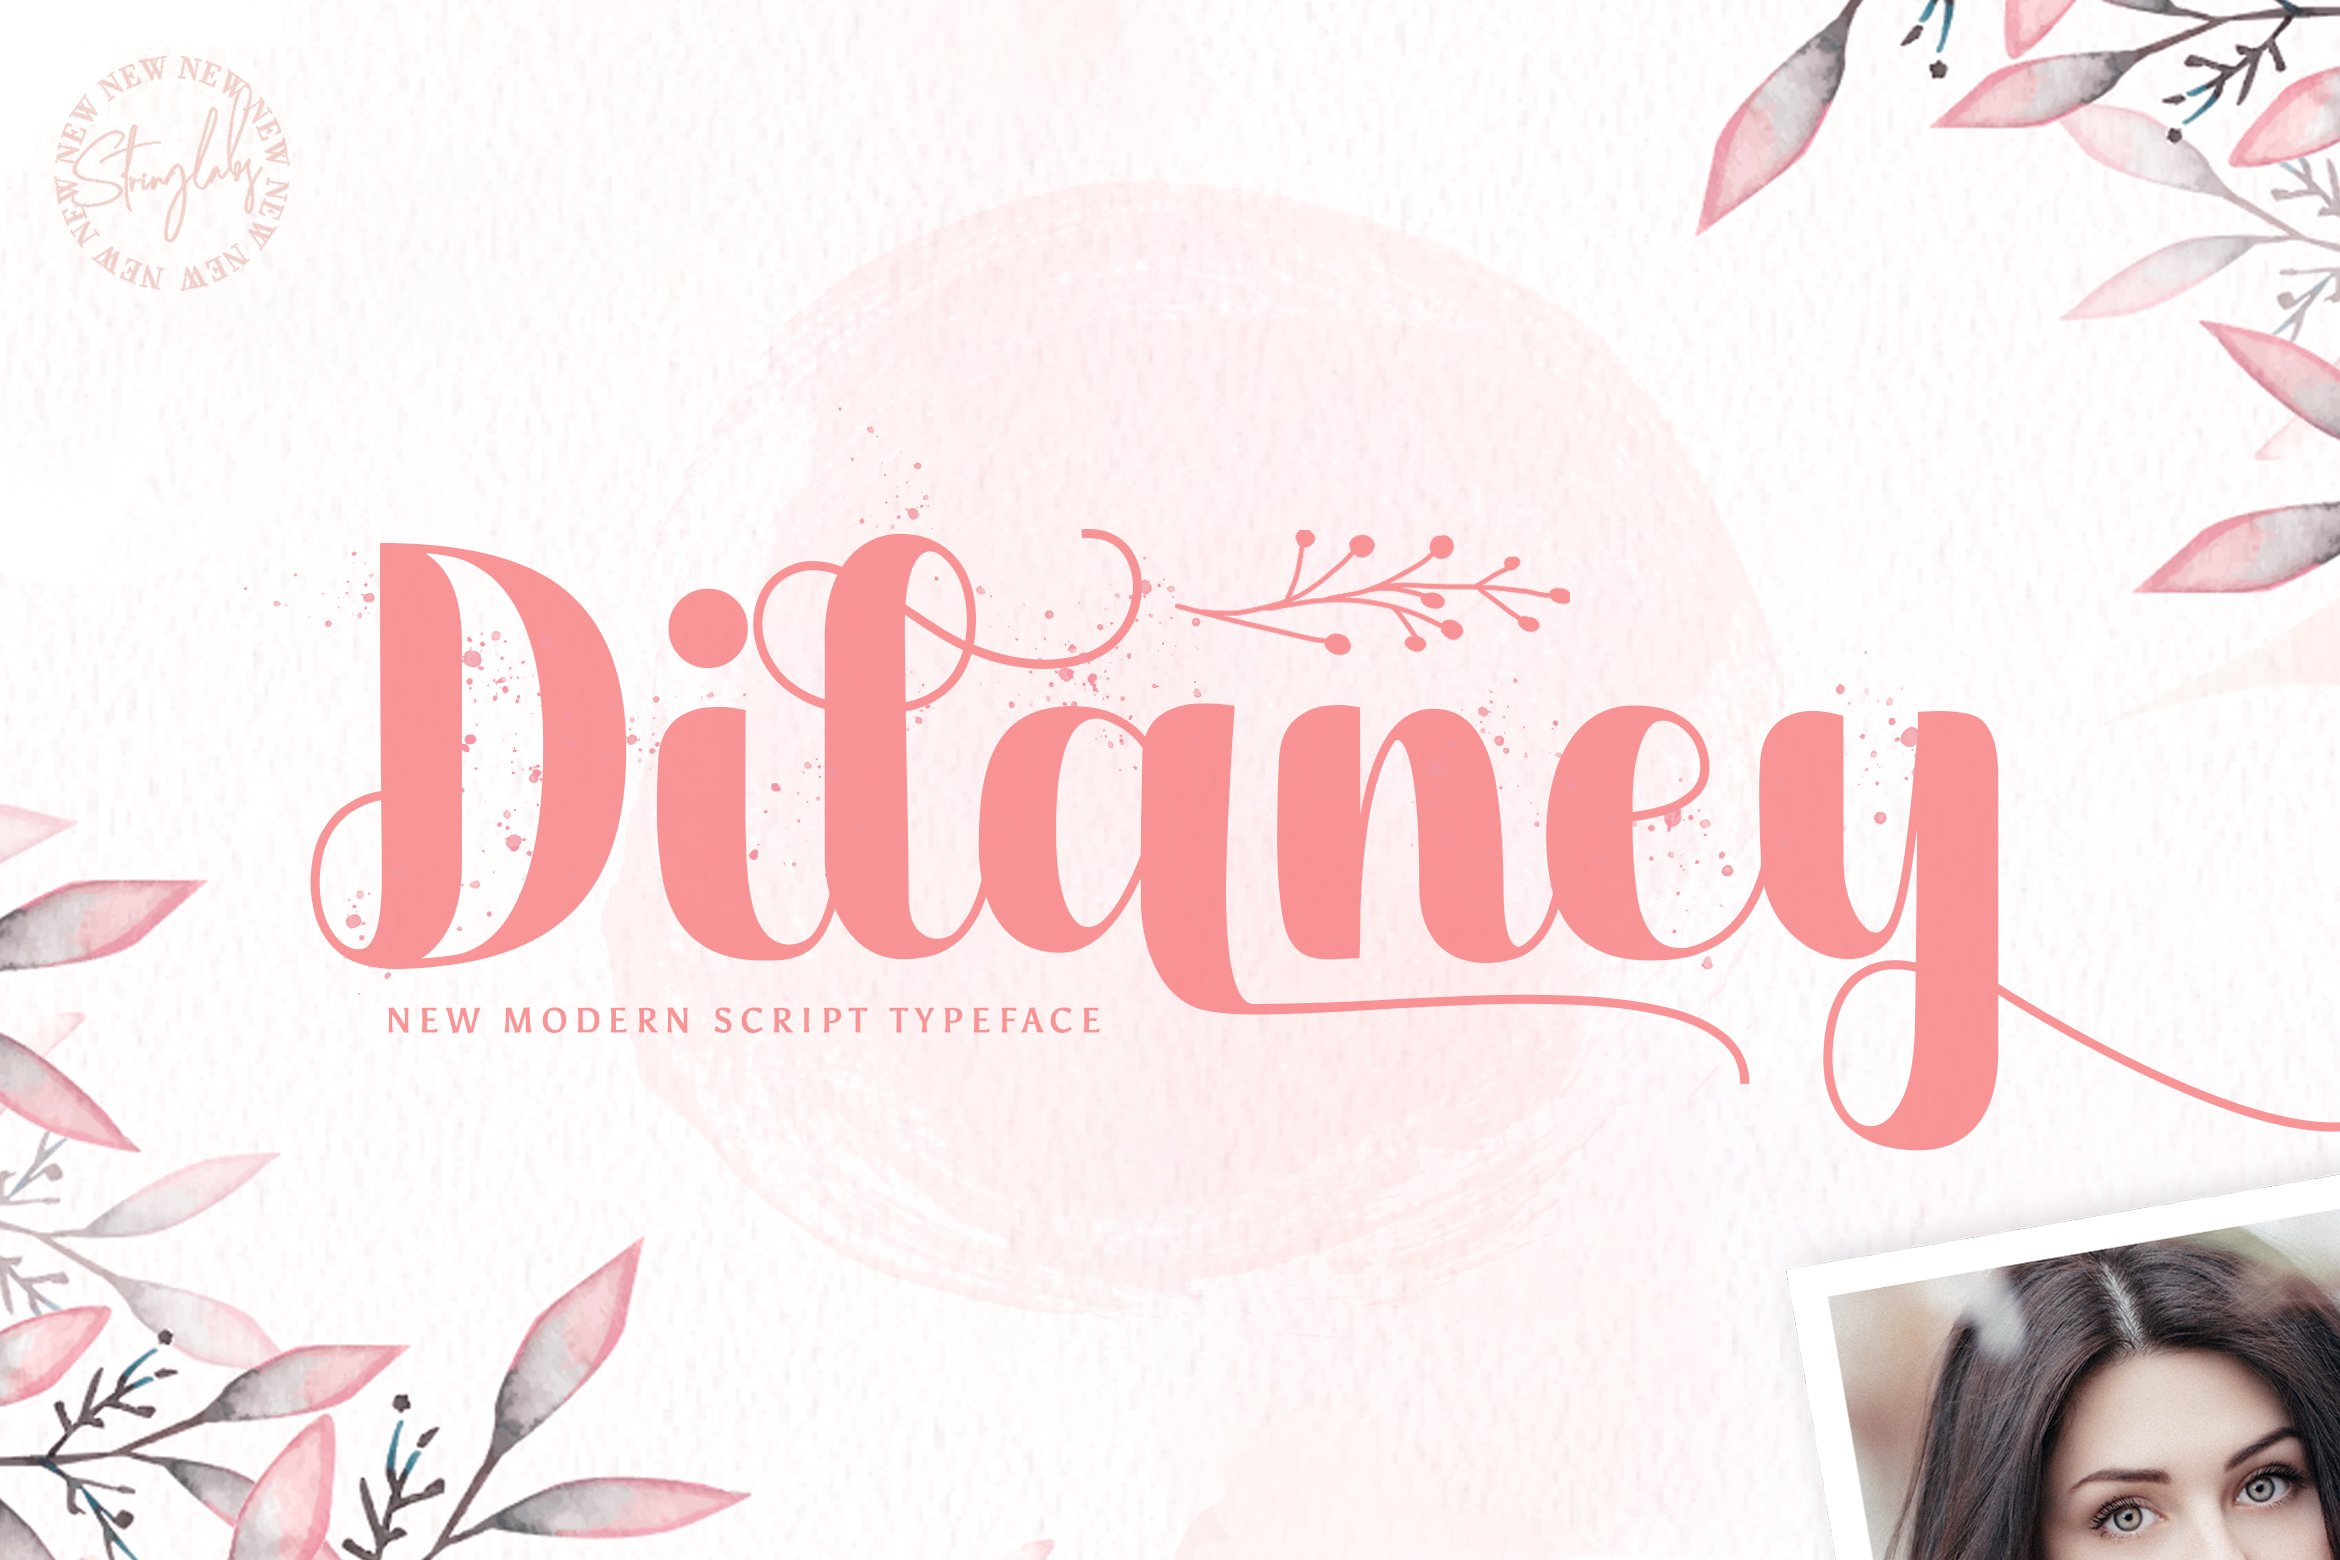 Dilaney - Handwritten Font cover image.